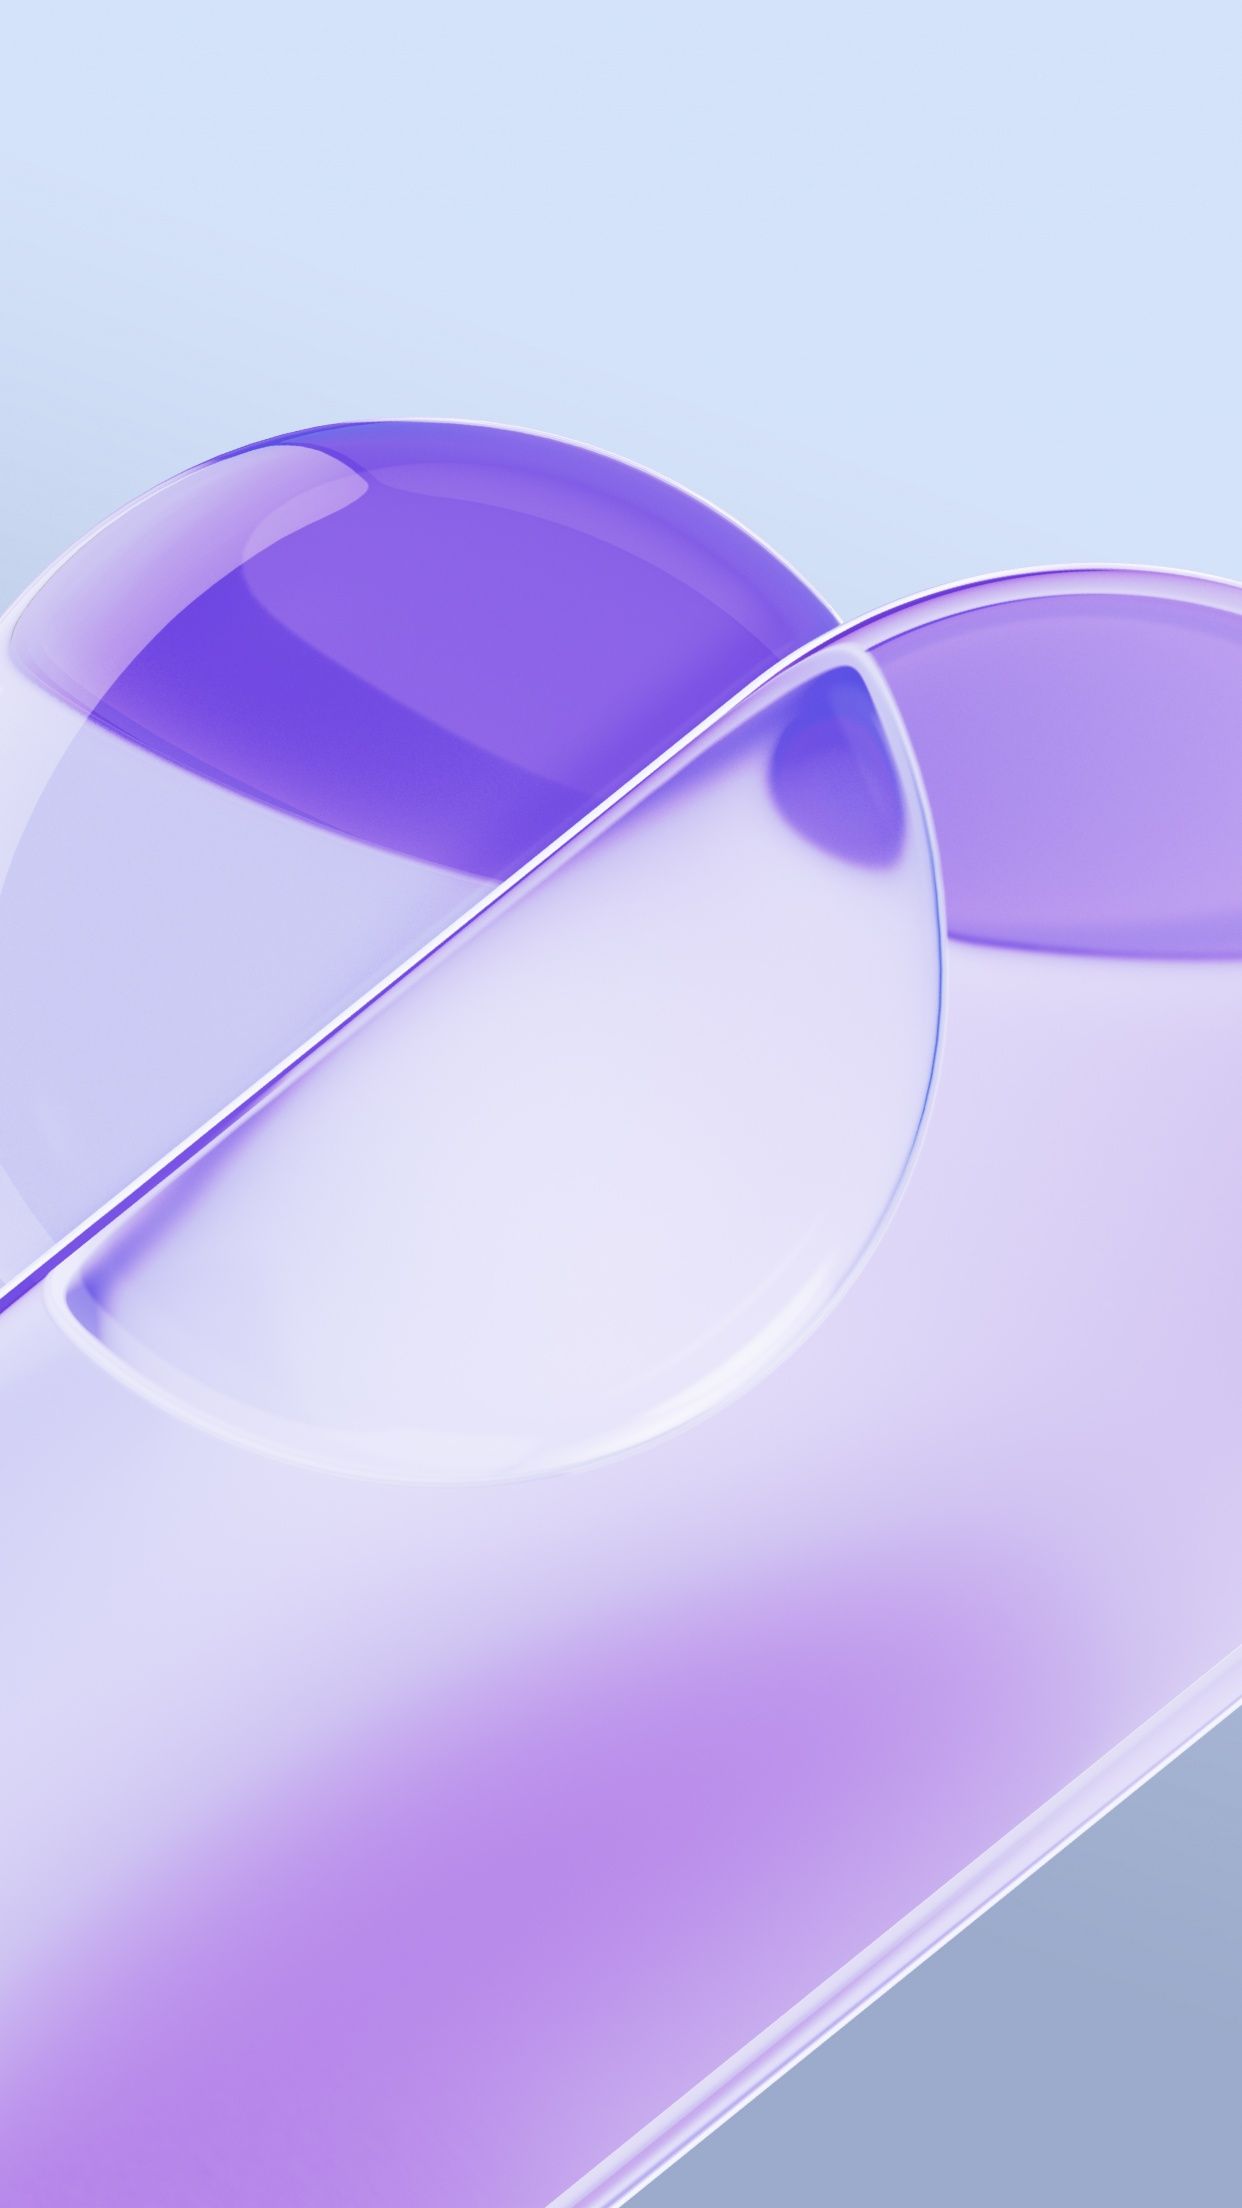 A close-up of a purple and blue abstract background with curved lines - Pastel purple, light purple